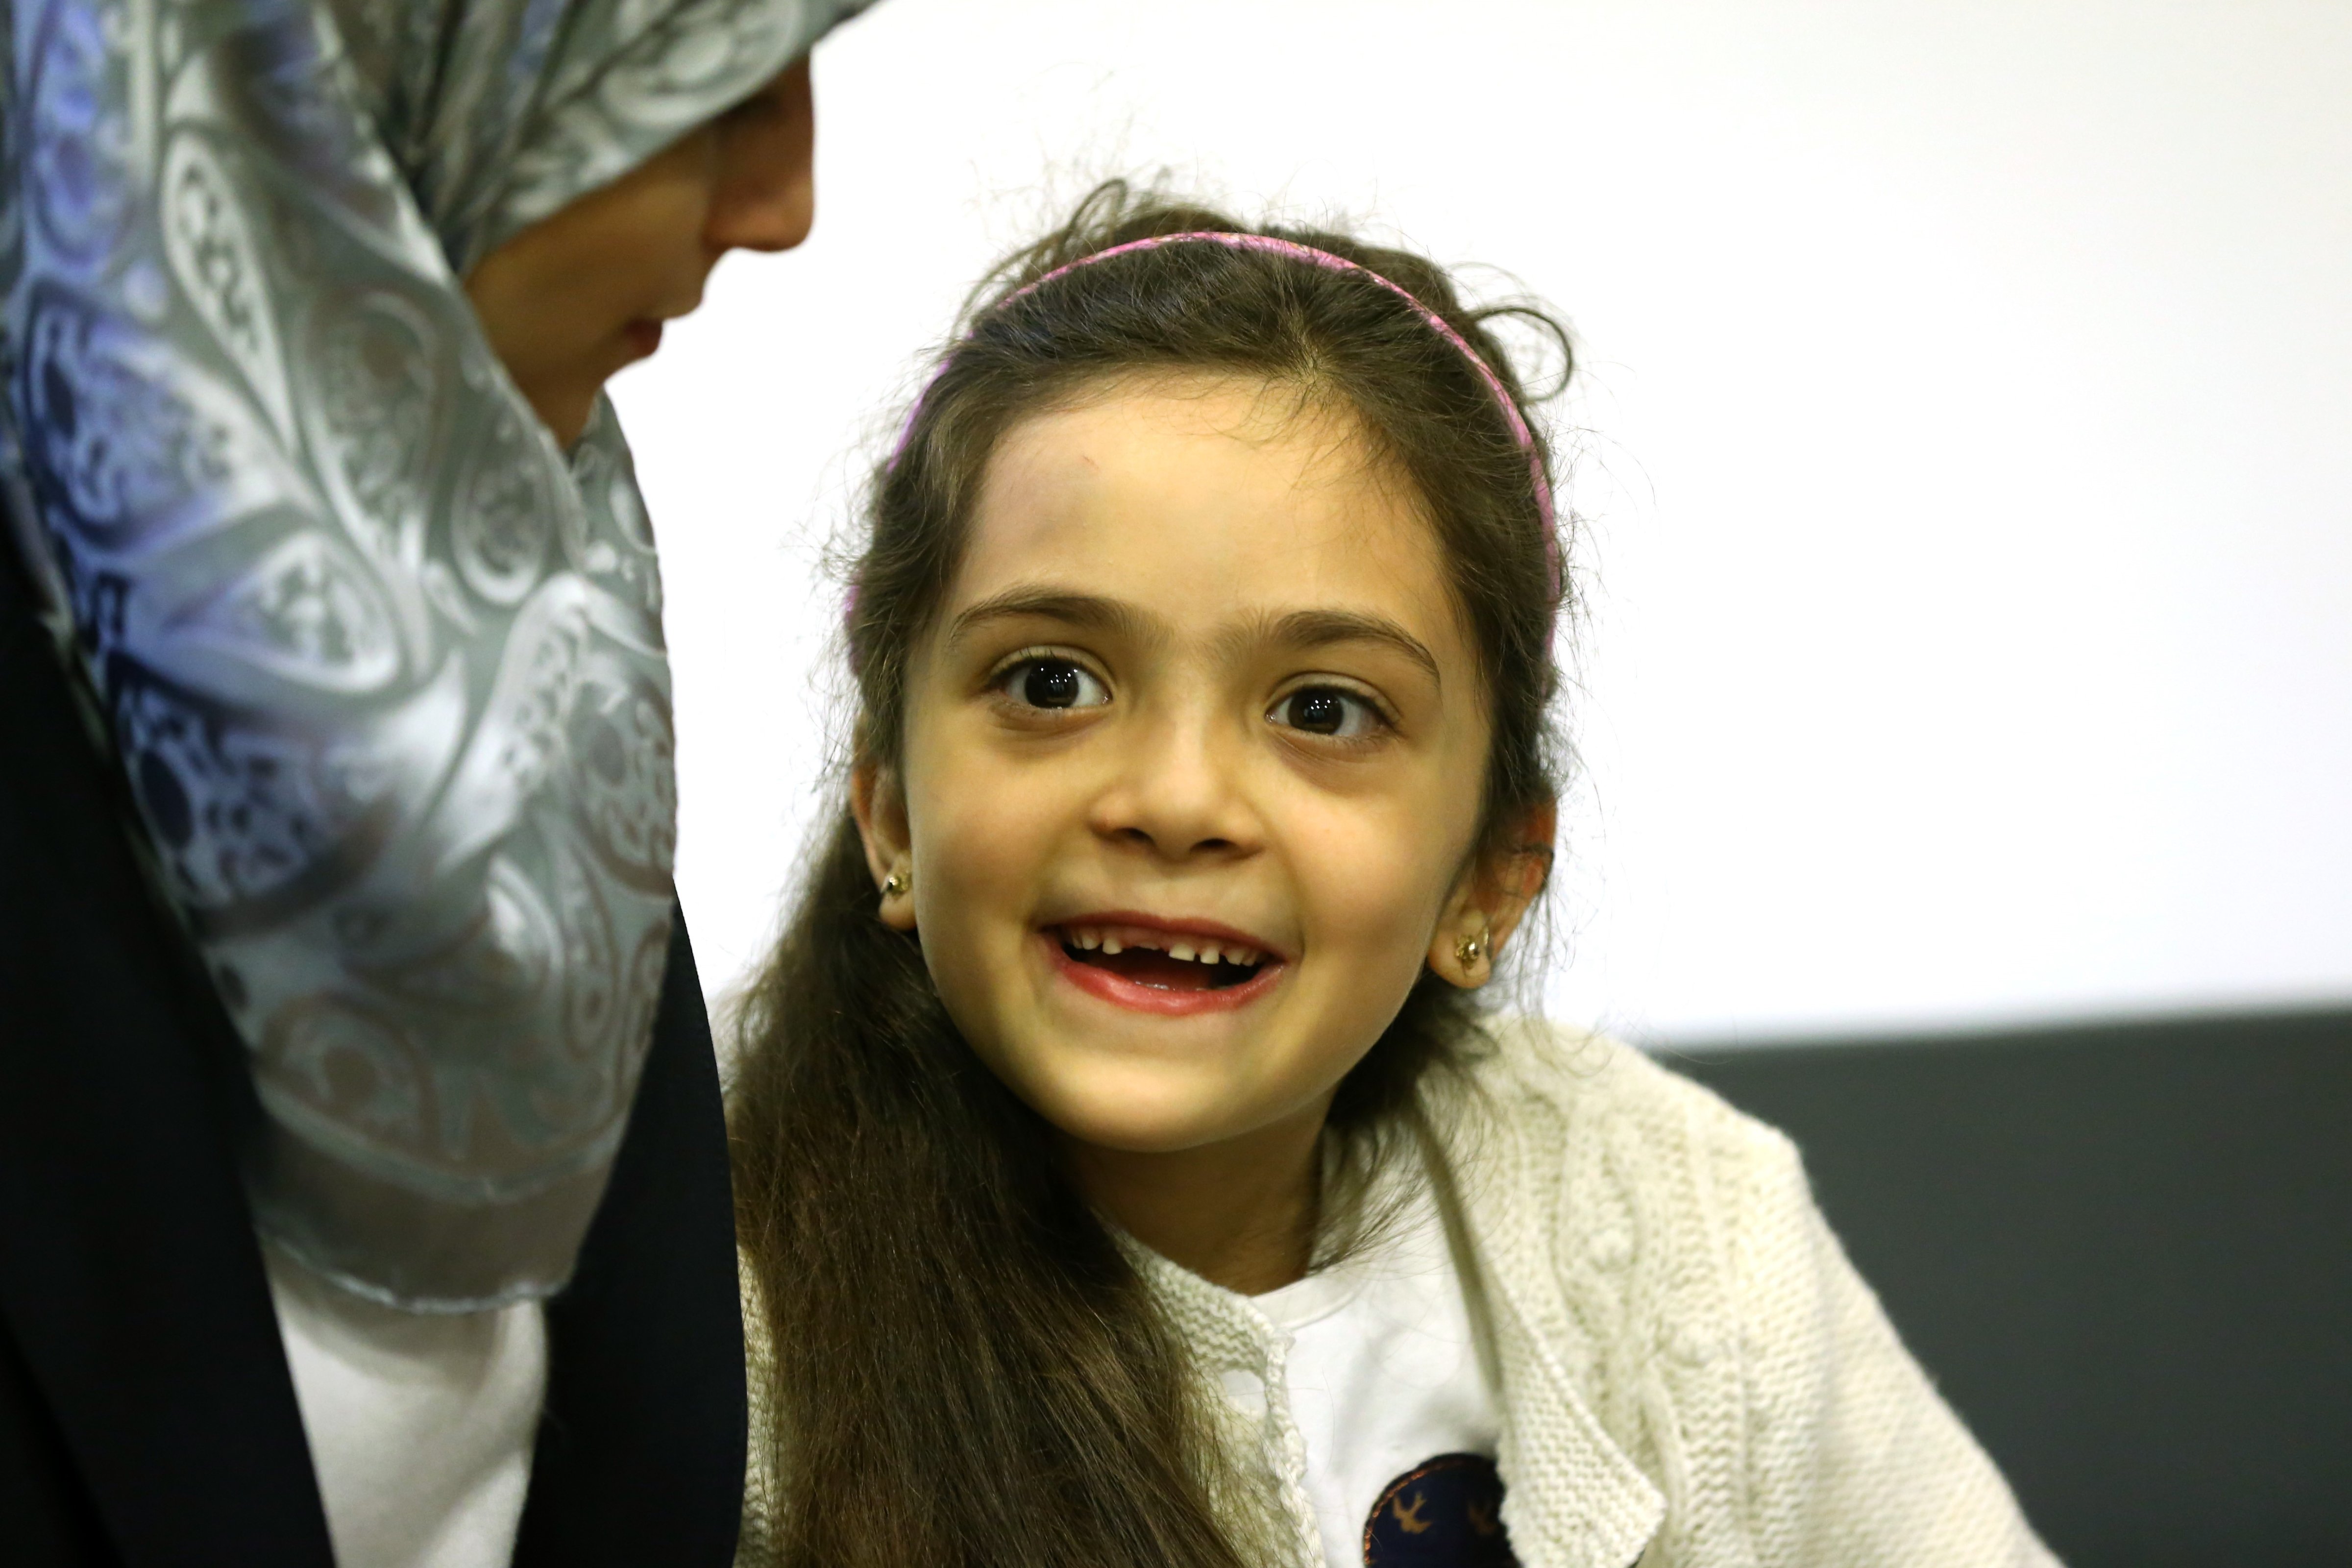 Syrian Bana Alabed (R), a seven-year-old girl who tweeted about the attacks in Aleppo, speaks to media with her family after she met with Turkish President Recep Tayyip Erdogan in Ankara, Turkey on December 21, 2016. (Anadolu Agency—Getty Images)